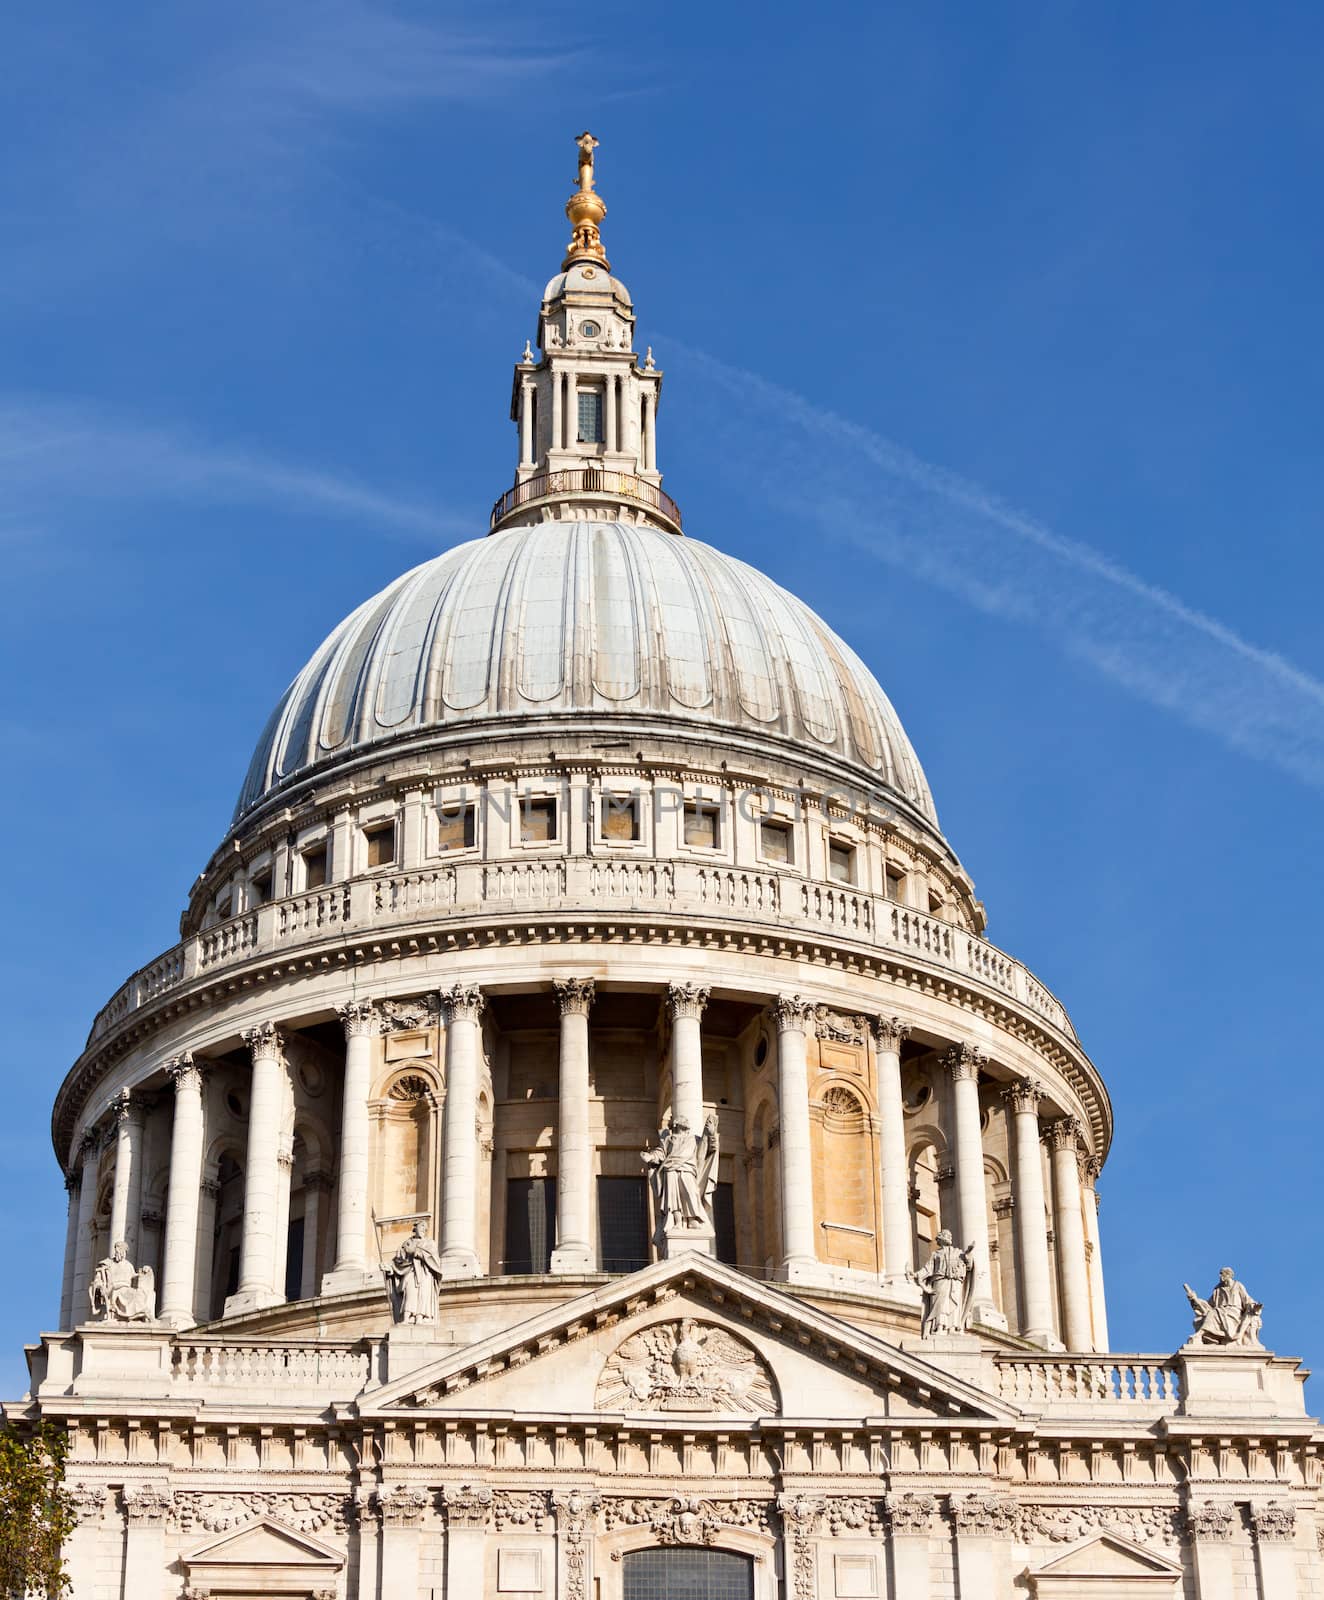 St Pauls Cathedral dome by naumoid